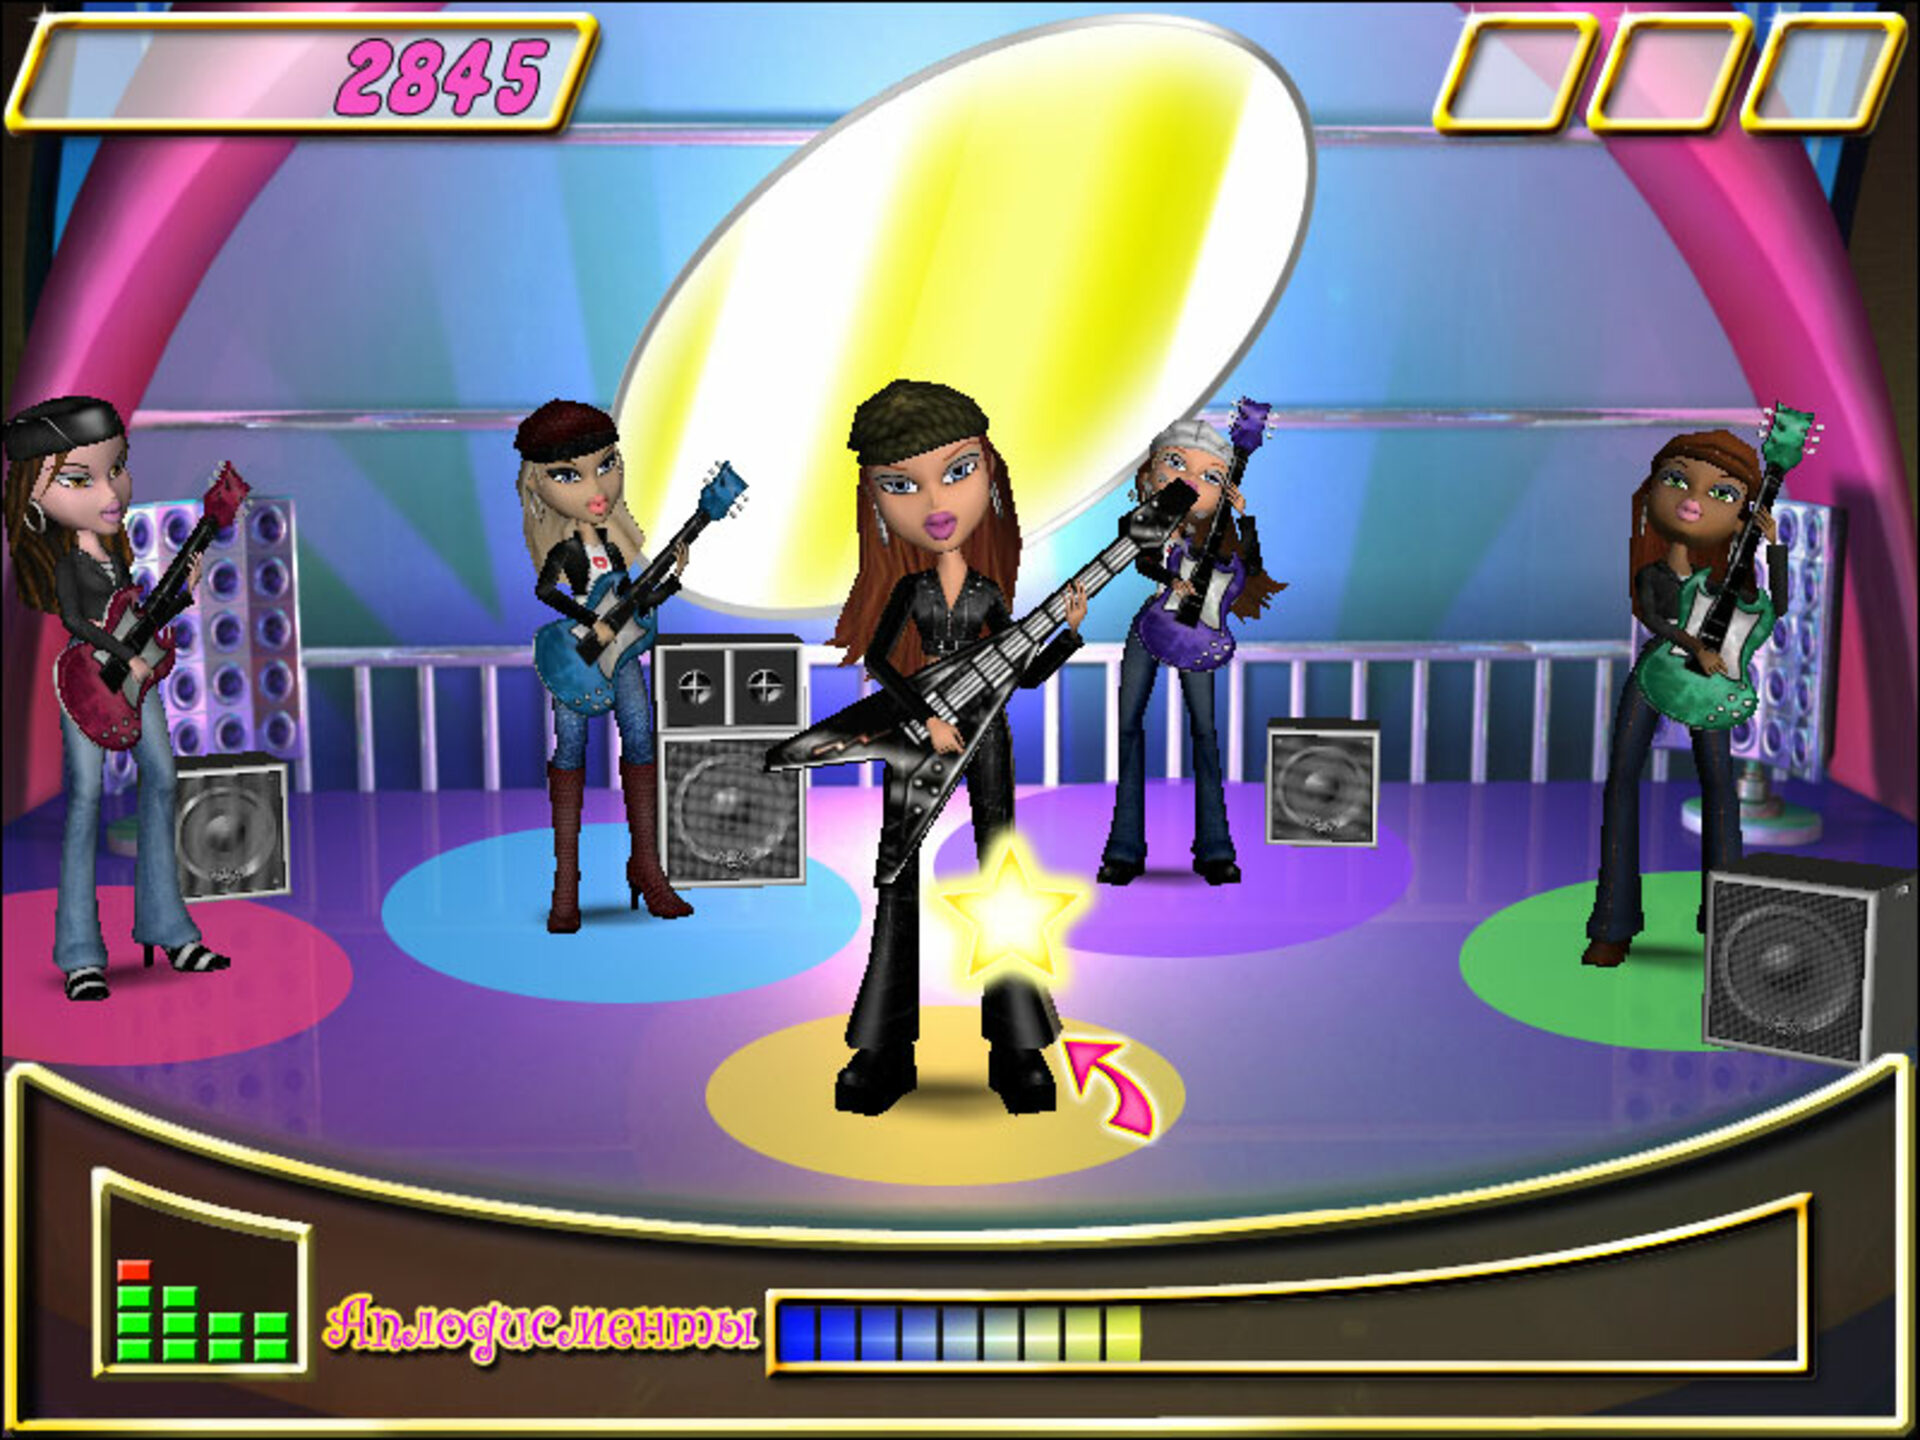 Happy Sweet 16 to the 'Bratz: Rock Angelz' Video Game — The Interlude